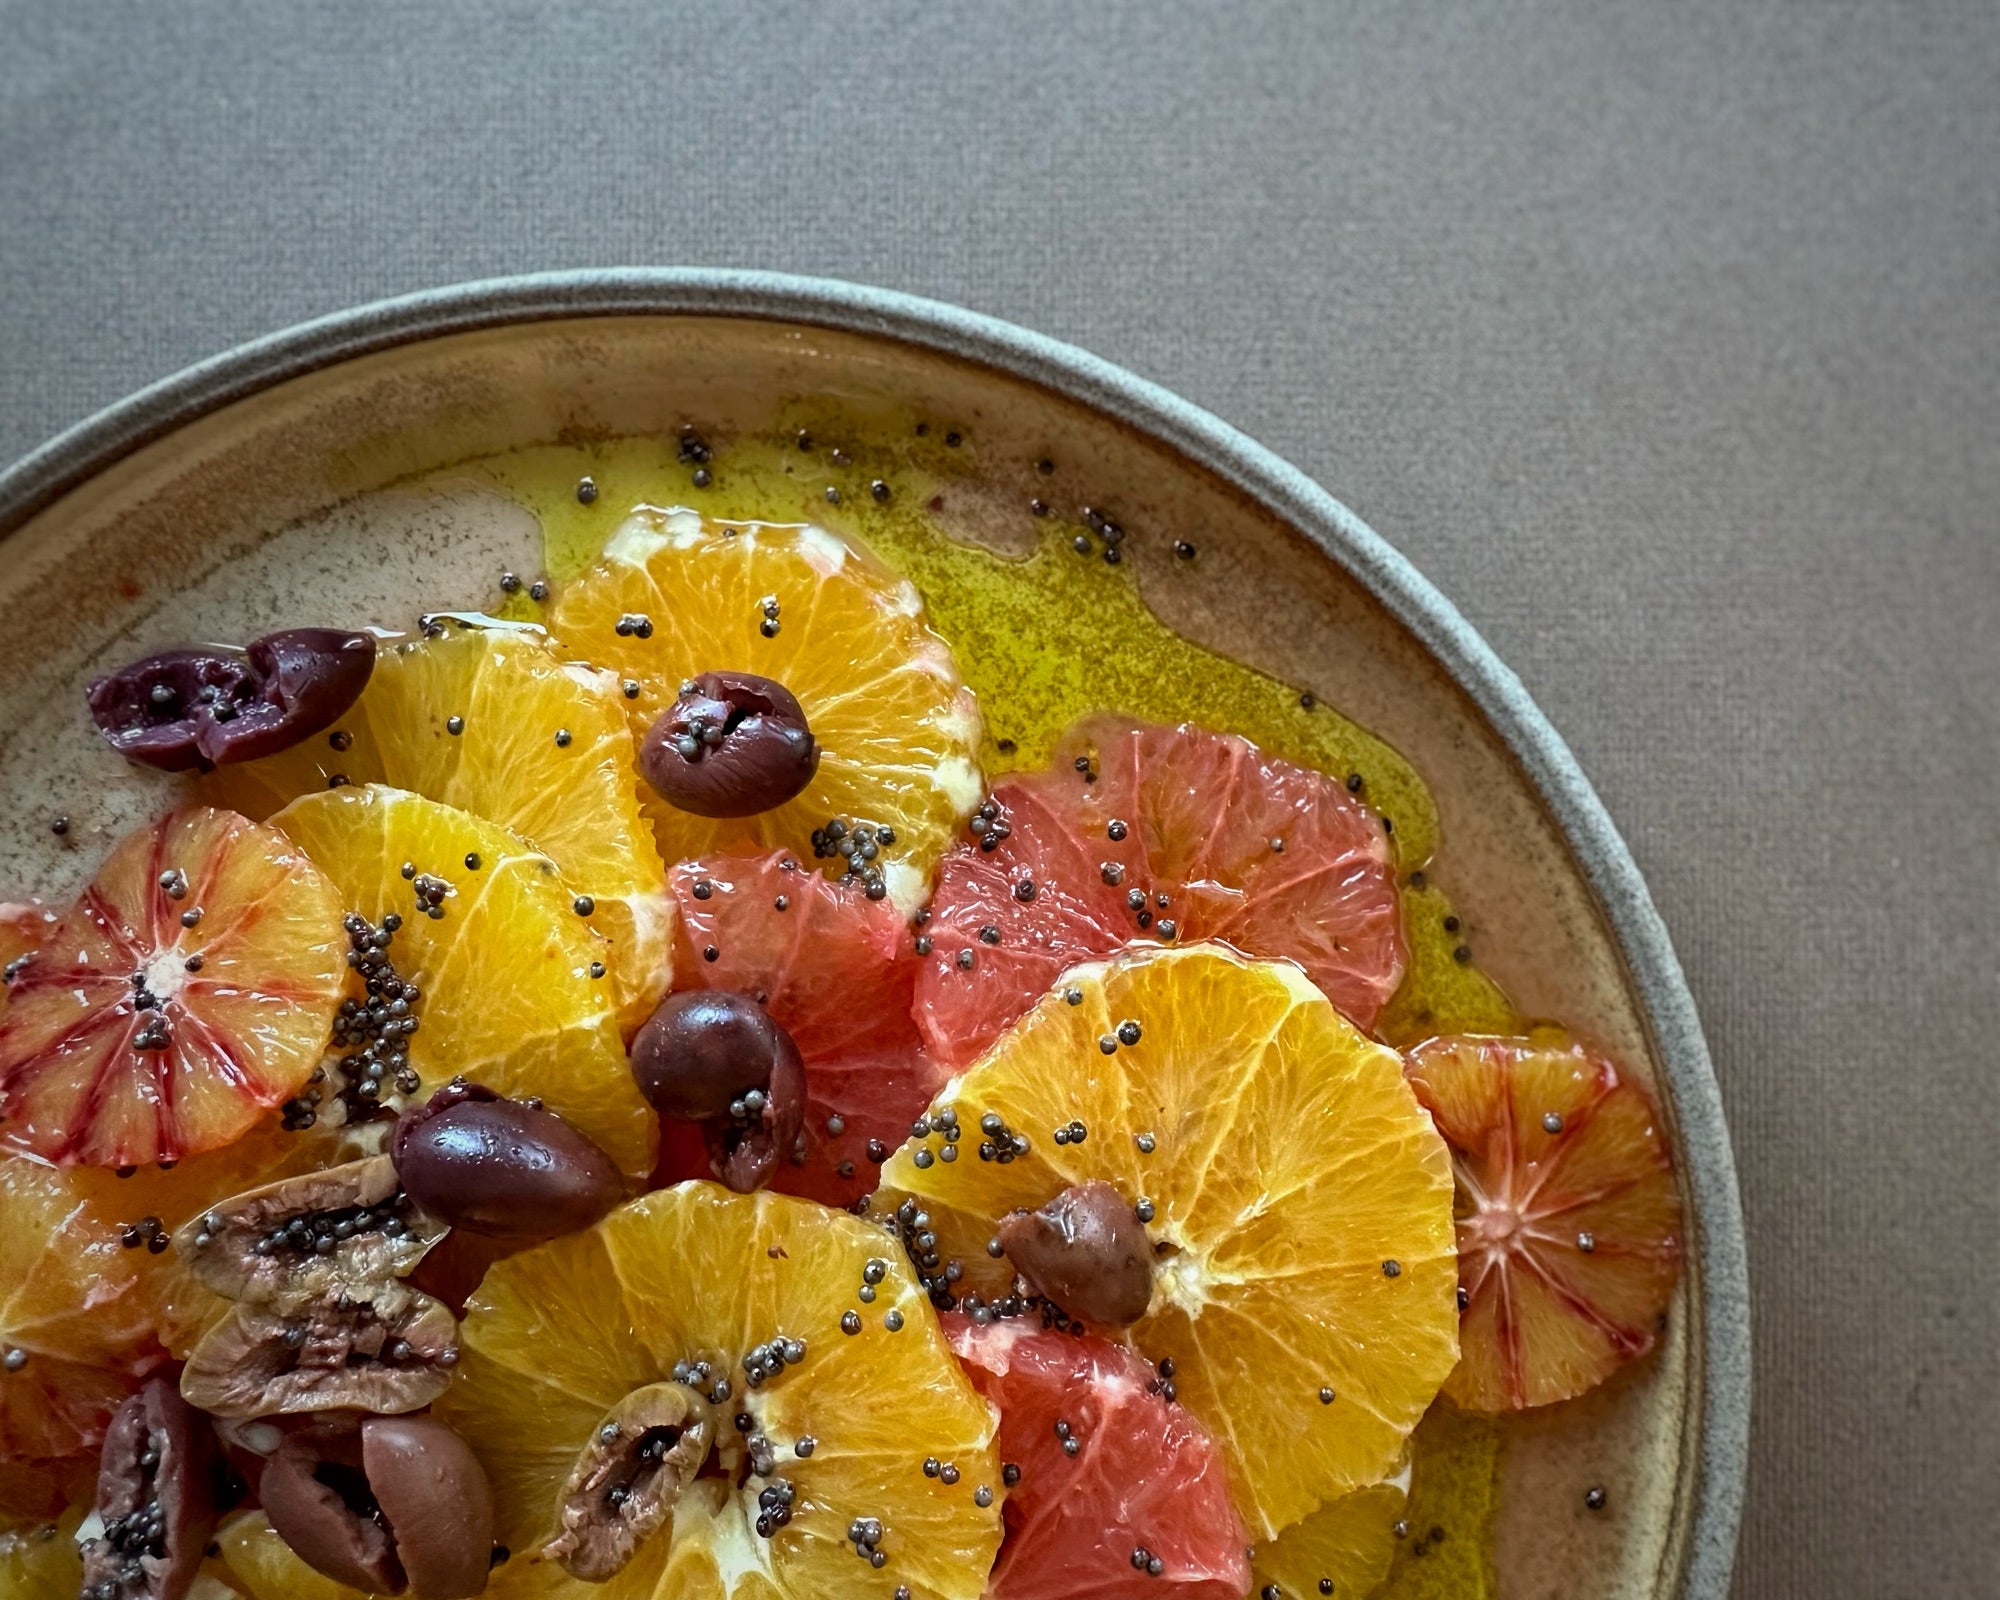 Winter citrus slices on a shallow ceramic plate, topped with mustard seeds and black olives.